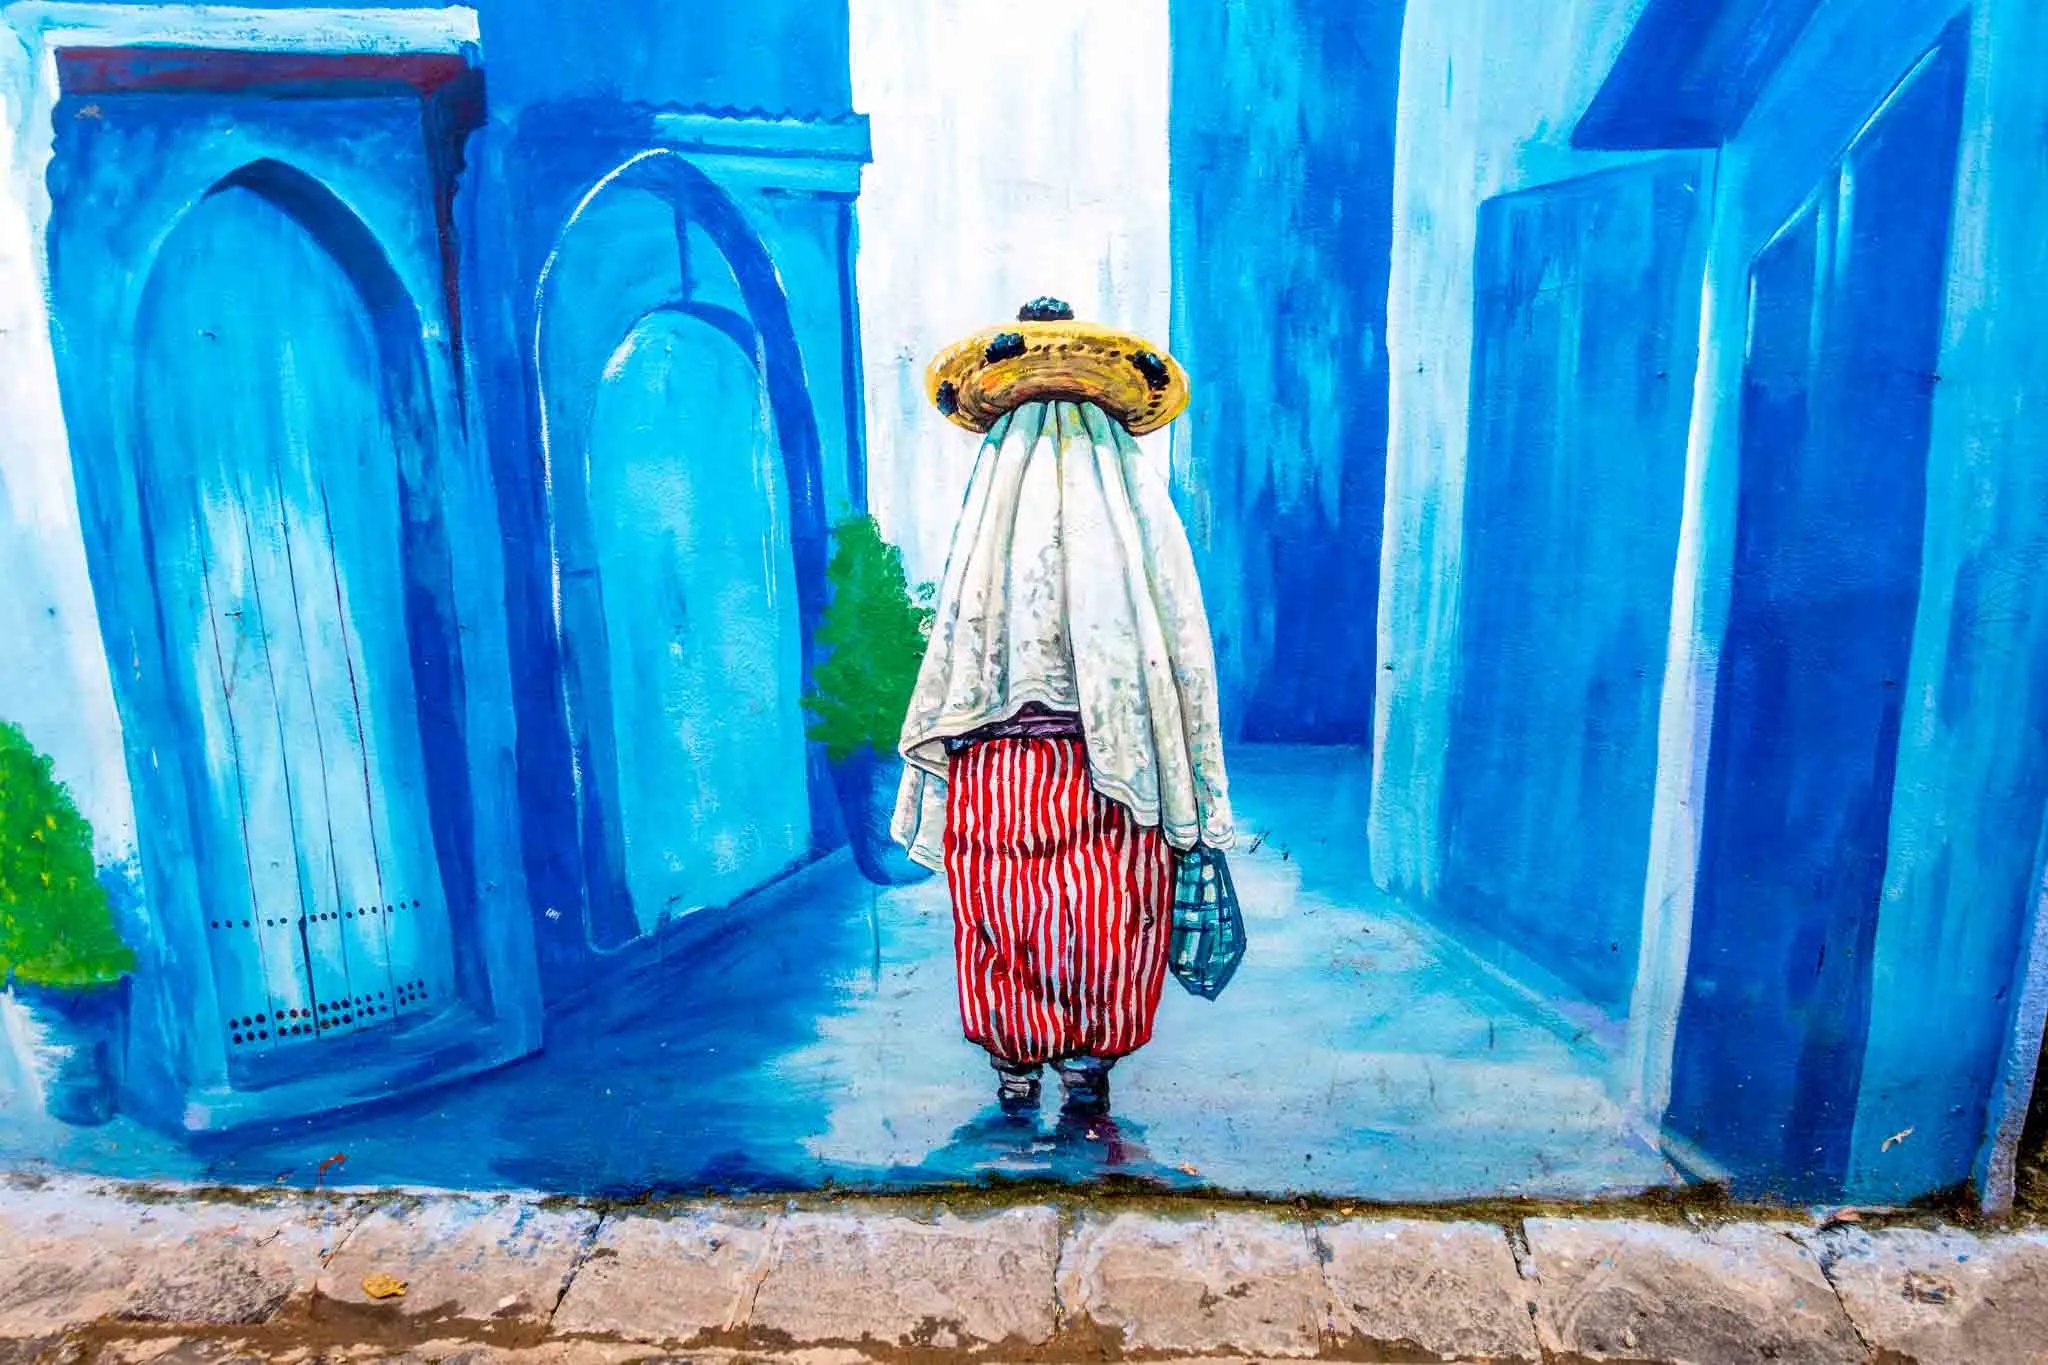 Mural of a fully-covered woman standing on a blue street